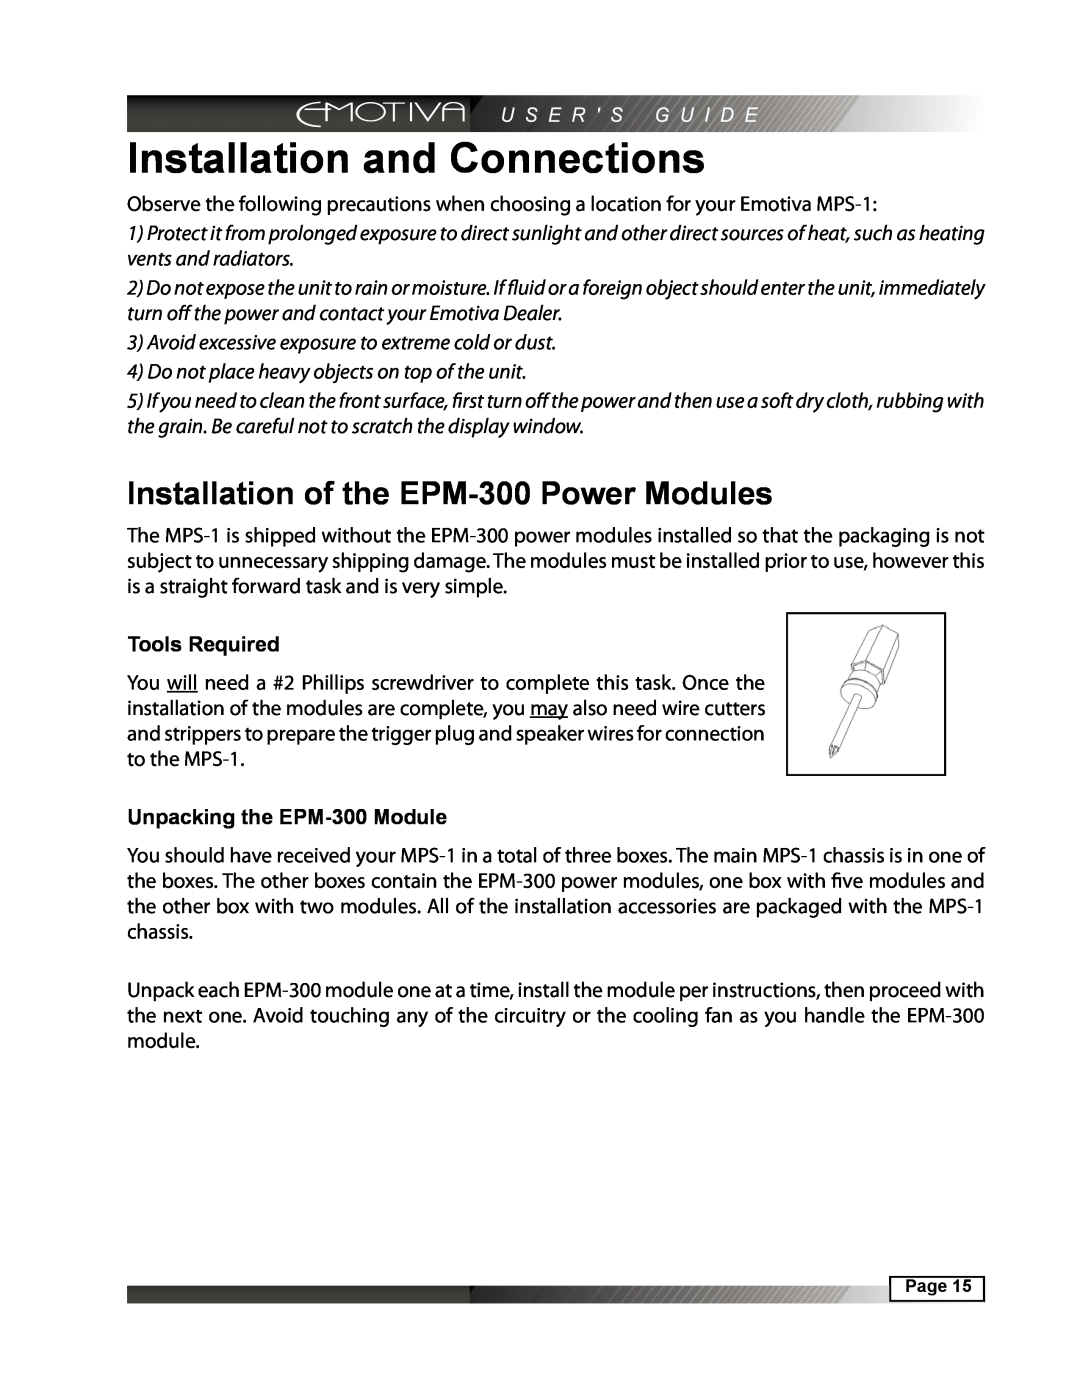 Emotiva MPS-1 manual Installation and Connections, Installation of the EPM-300Power Modules 